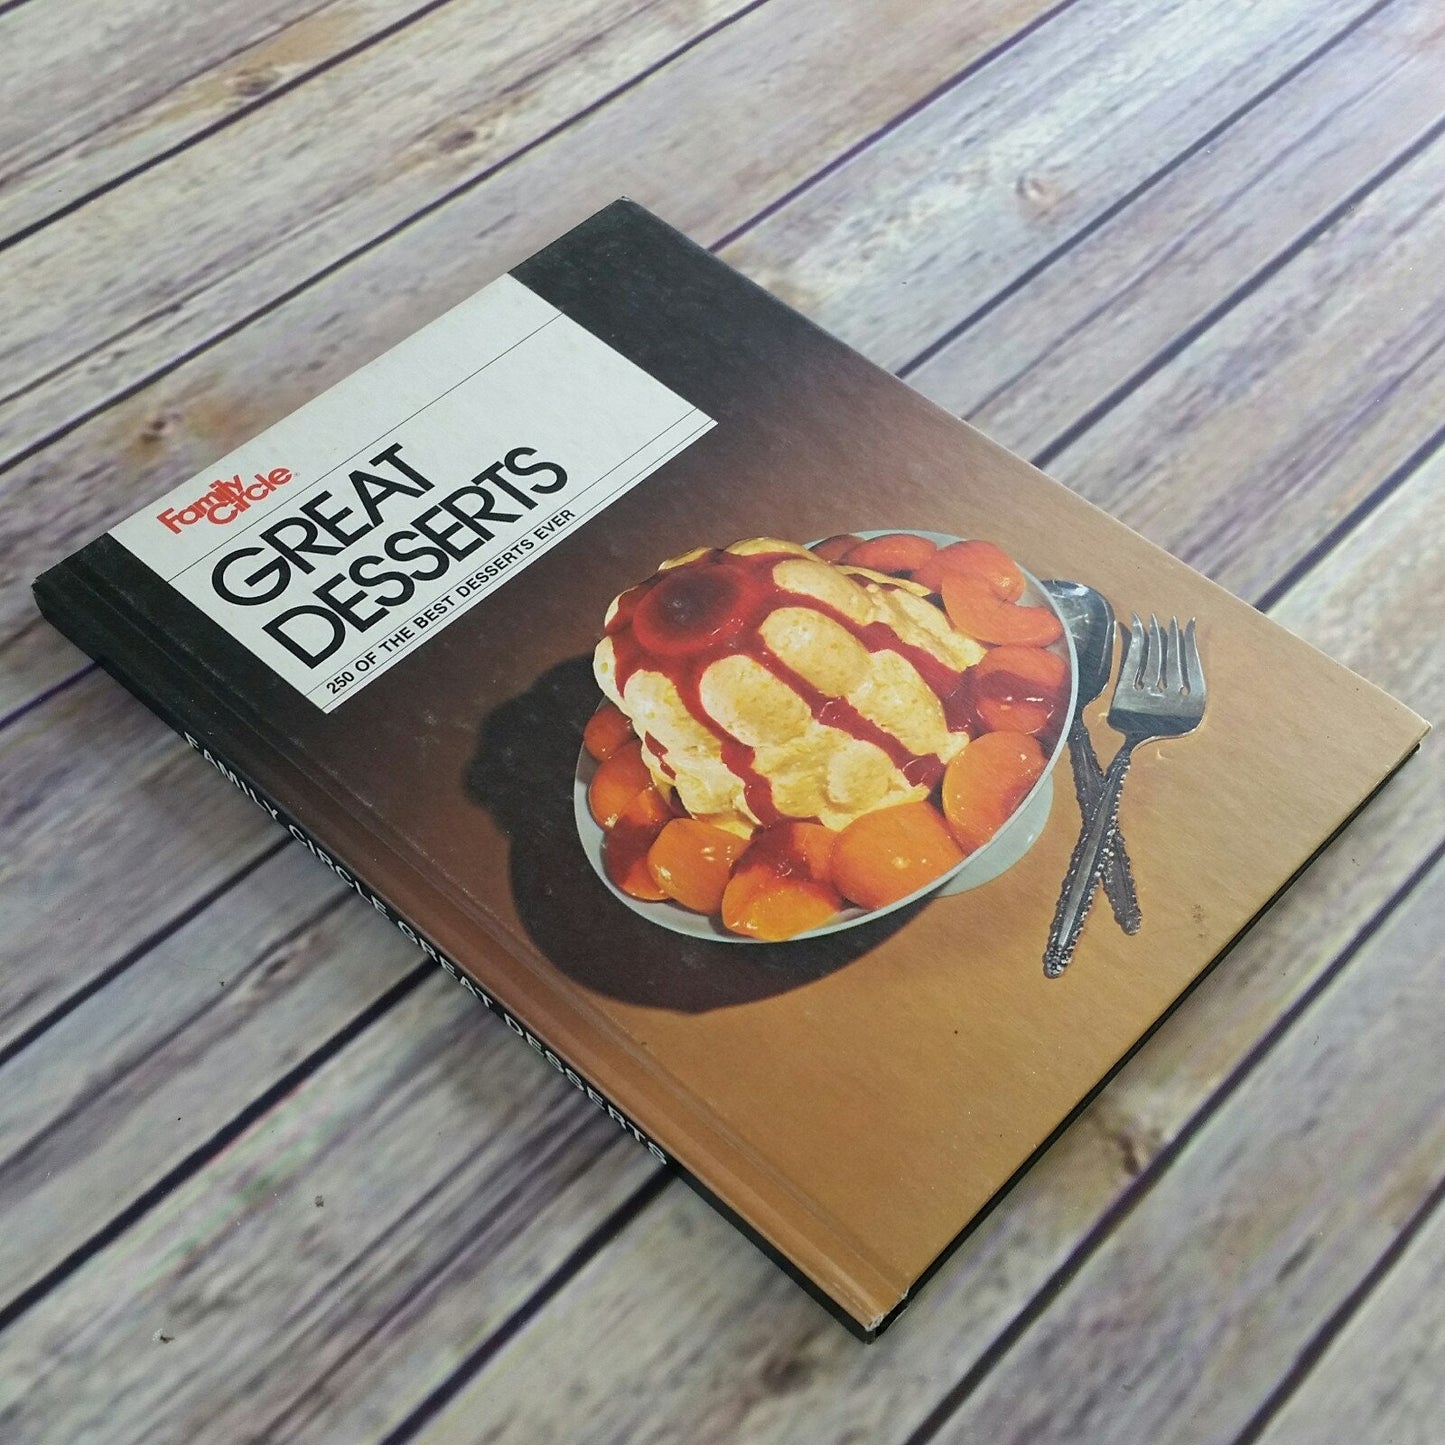 Family Circle Meat Cookbook 1978 Hardcover 